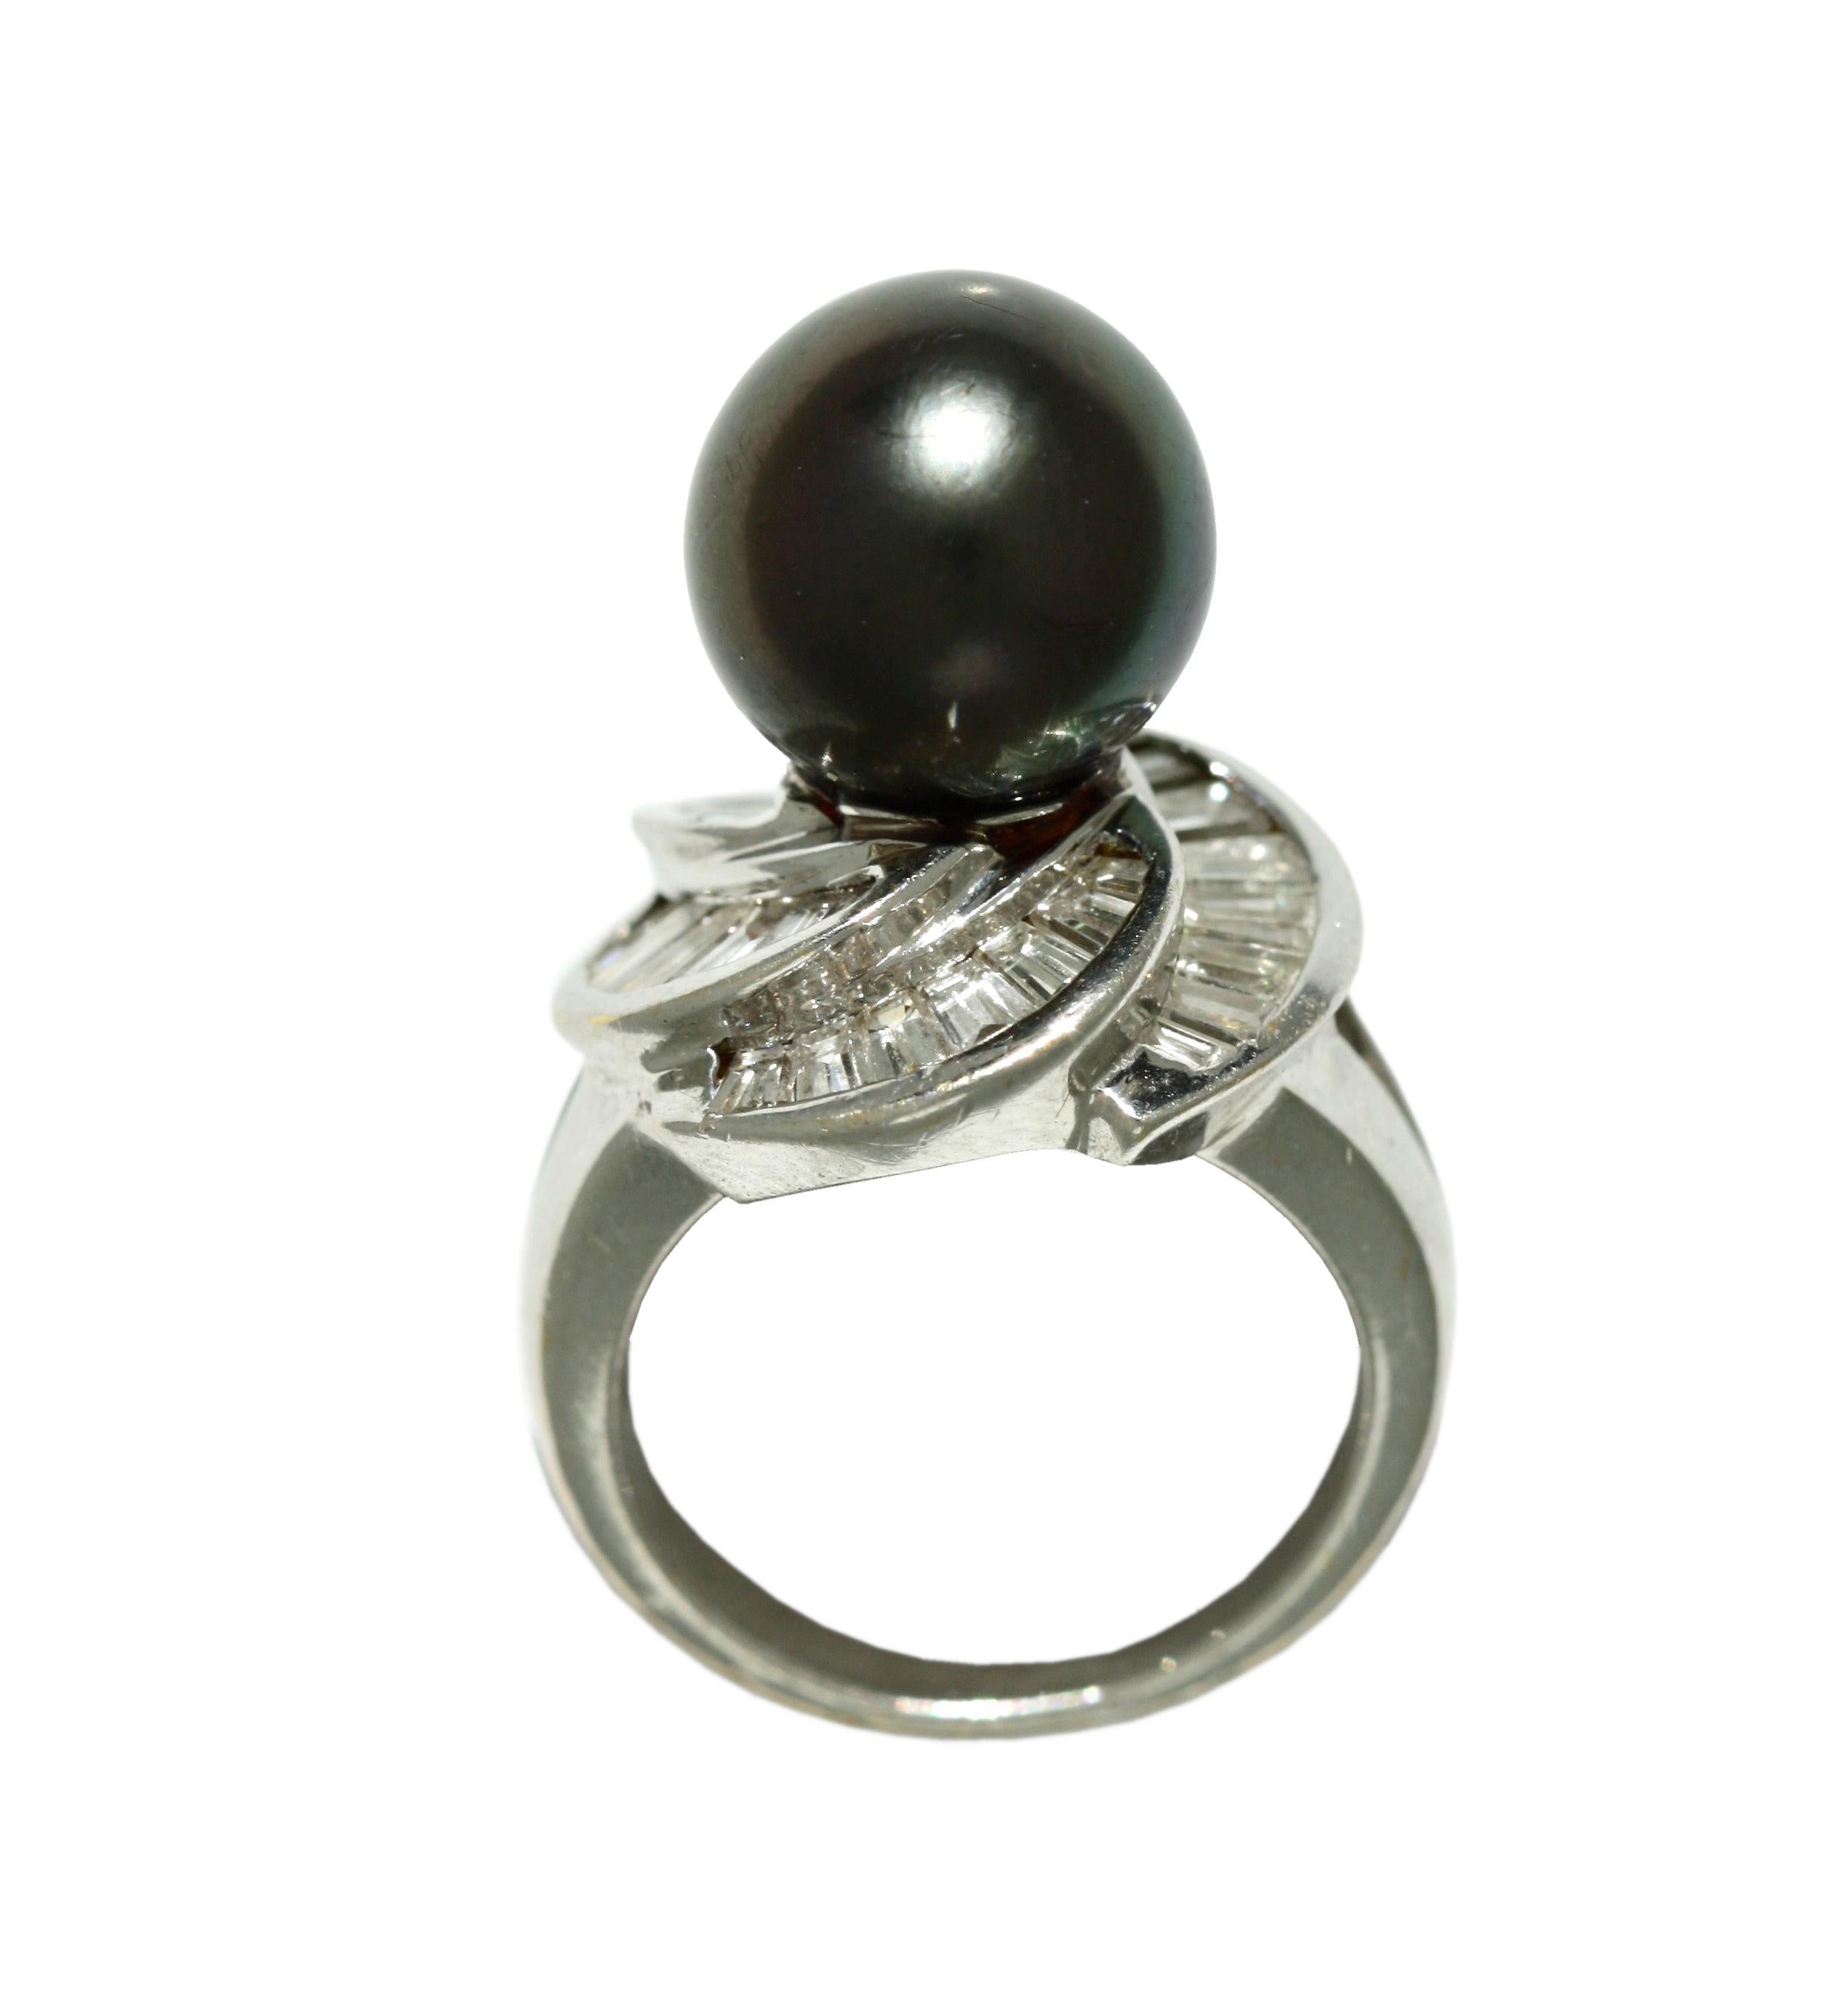 18 Karat White Gold, Diamond and Cultured Pearl Ring
Centered by a Tahitian Pearl measuring approximately 11.7 by 11.6 mm 
diamonds weighing approximately 3.08 carats, size 4 3/4